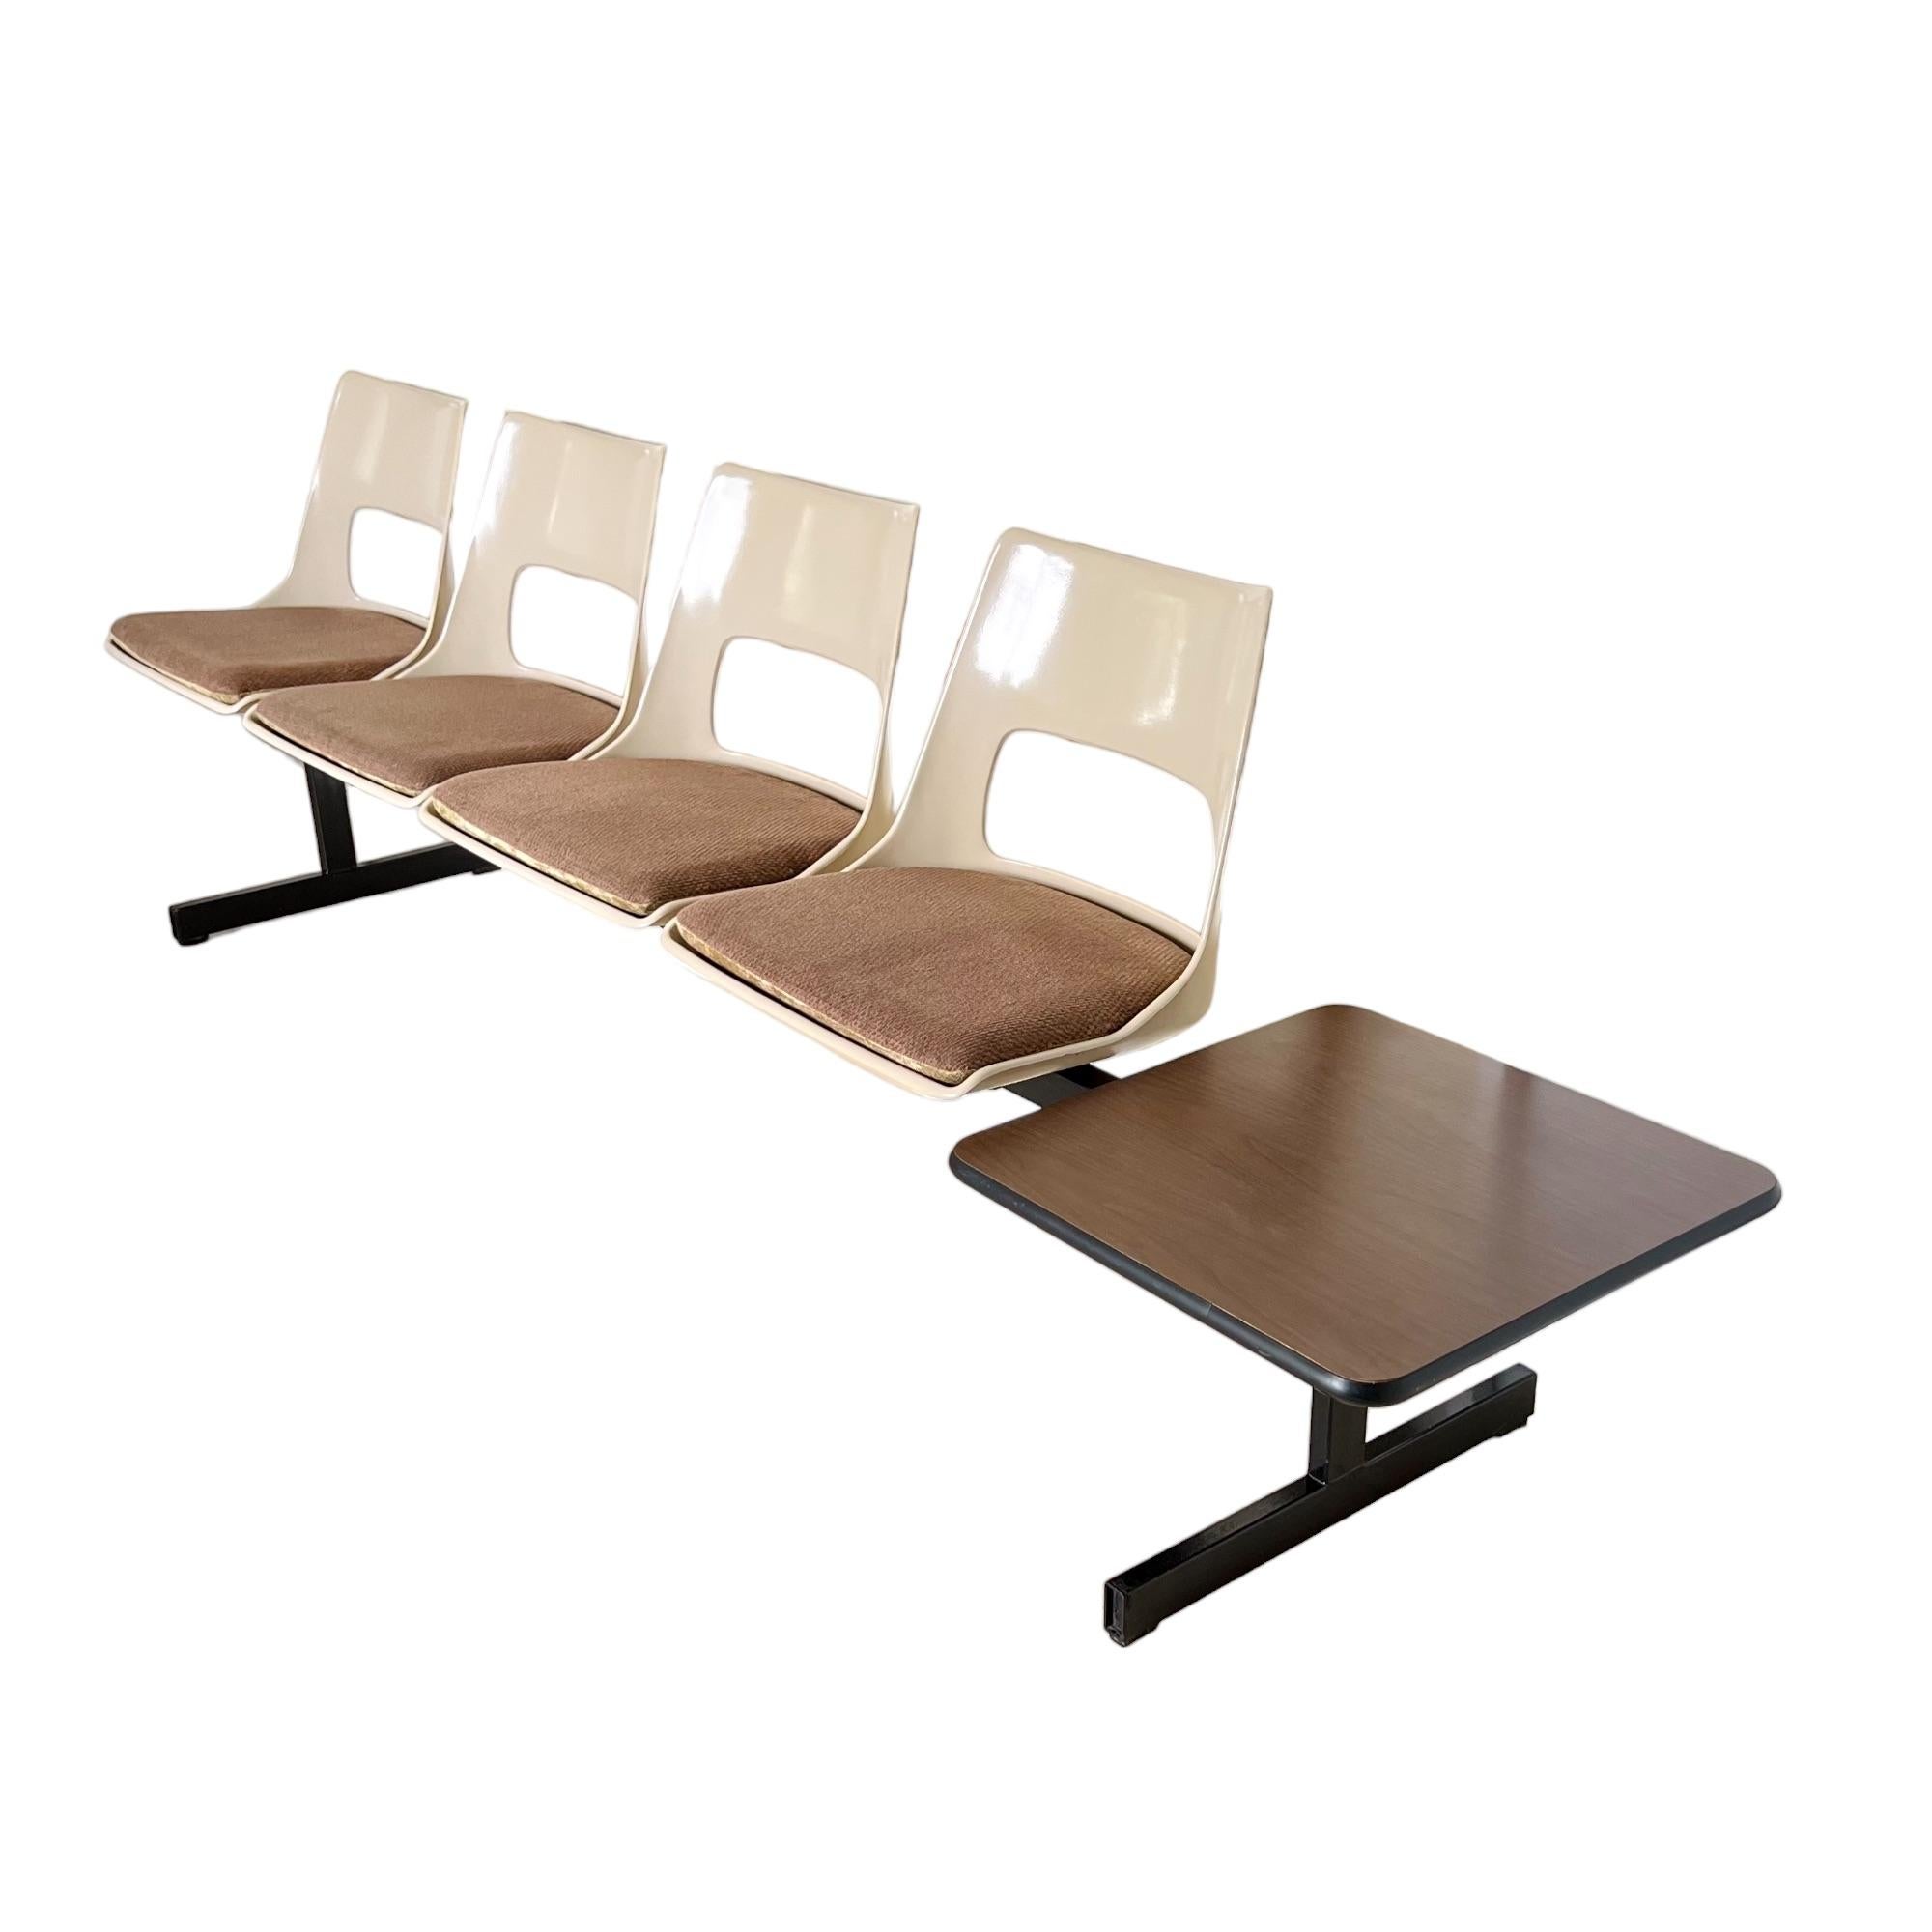 Vintage mid-century modern tandem beam seating by Krueger International circa 1970. This bench features four molded fiberglass light beige color shells and a wood finish side table connected on a black metal stretcher frame. The fiberglass seats are